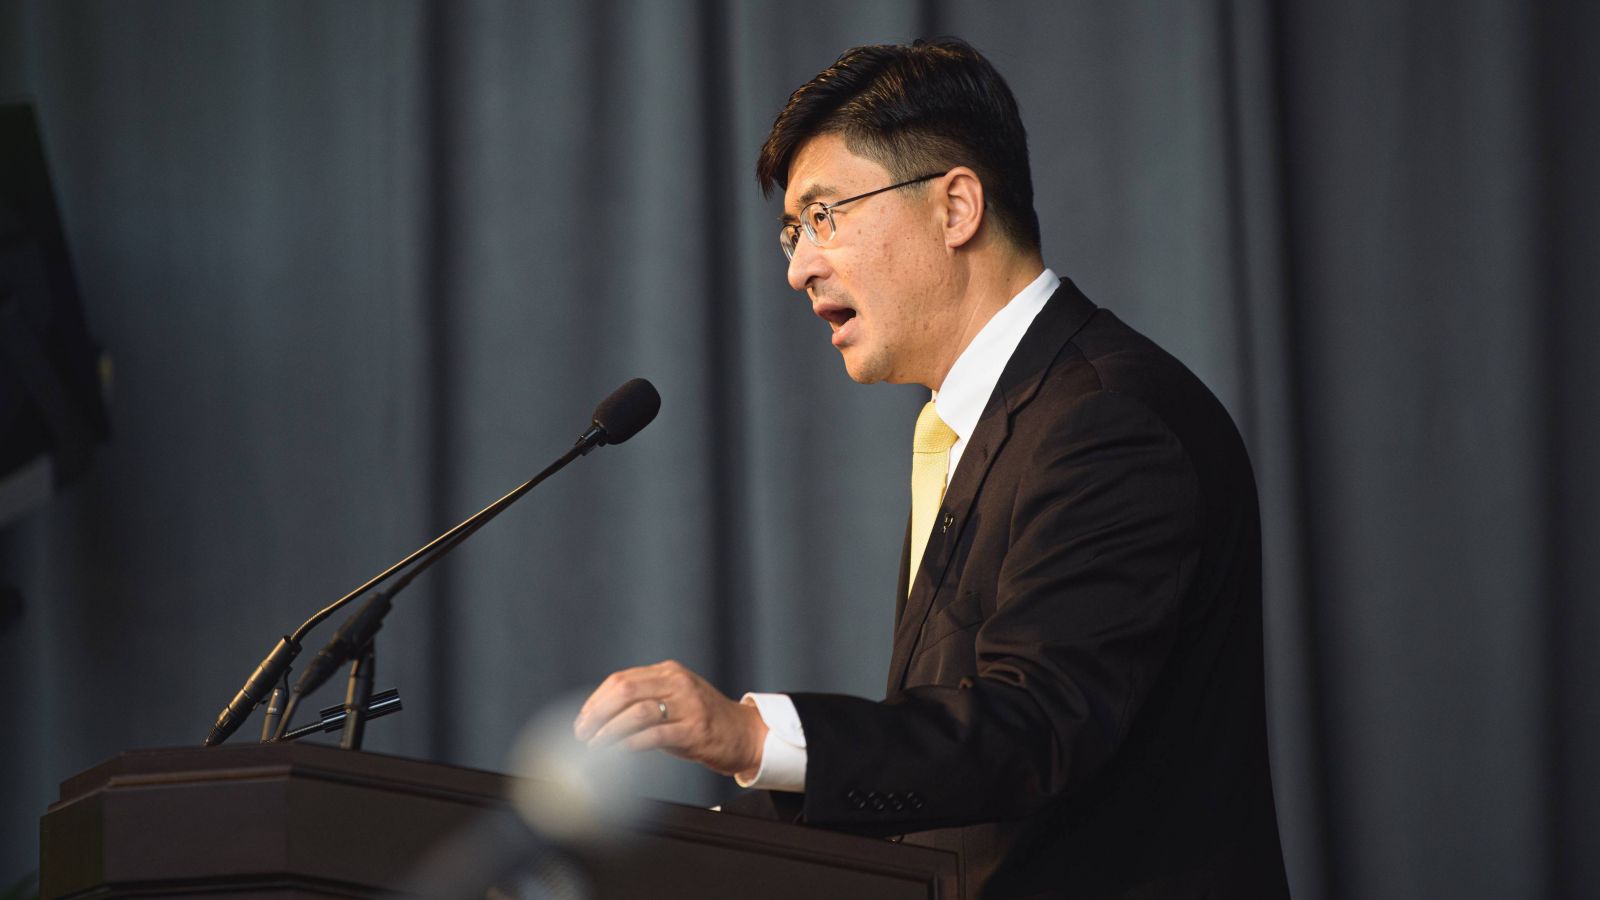 Purdue University President Mung Chiang signed a joint agreement with Indiana University to split IUPUI into two distinct campuses, one of which will become Purdue Indianapolis (Photo provided by Purdue News Service).